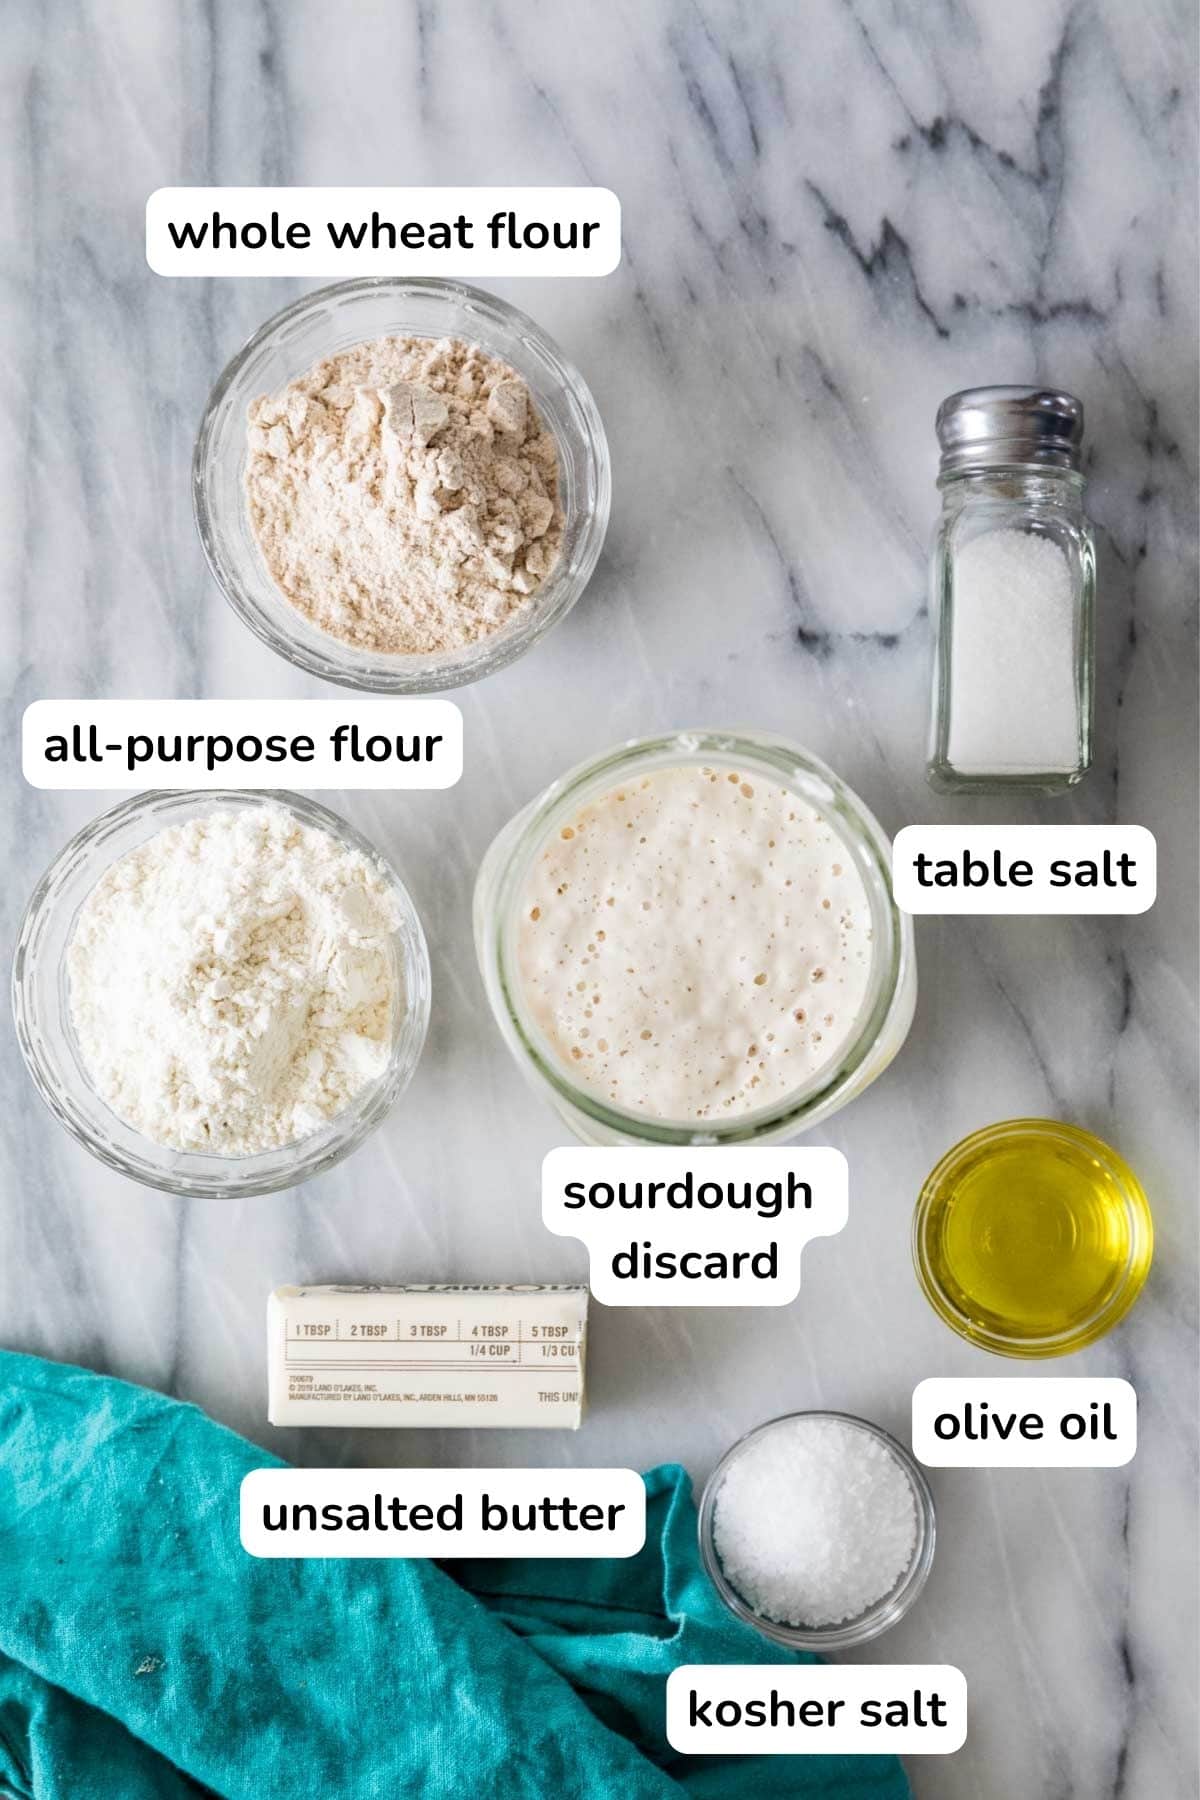 Overhead view of labeled ingredients including sourdough discard, whole wheat flour, olive oil, and more.